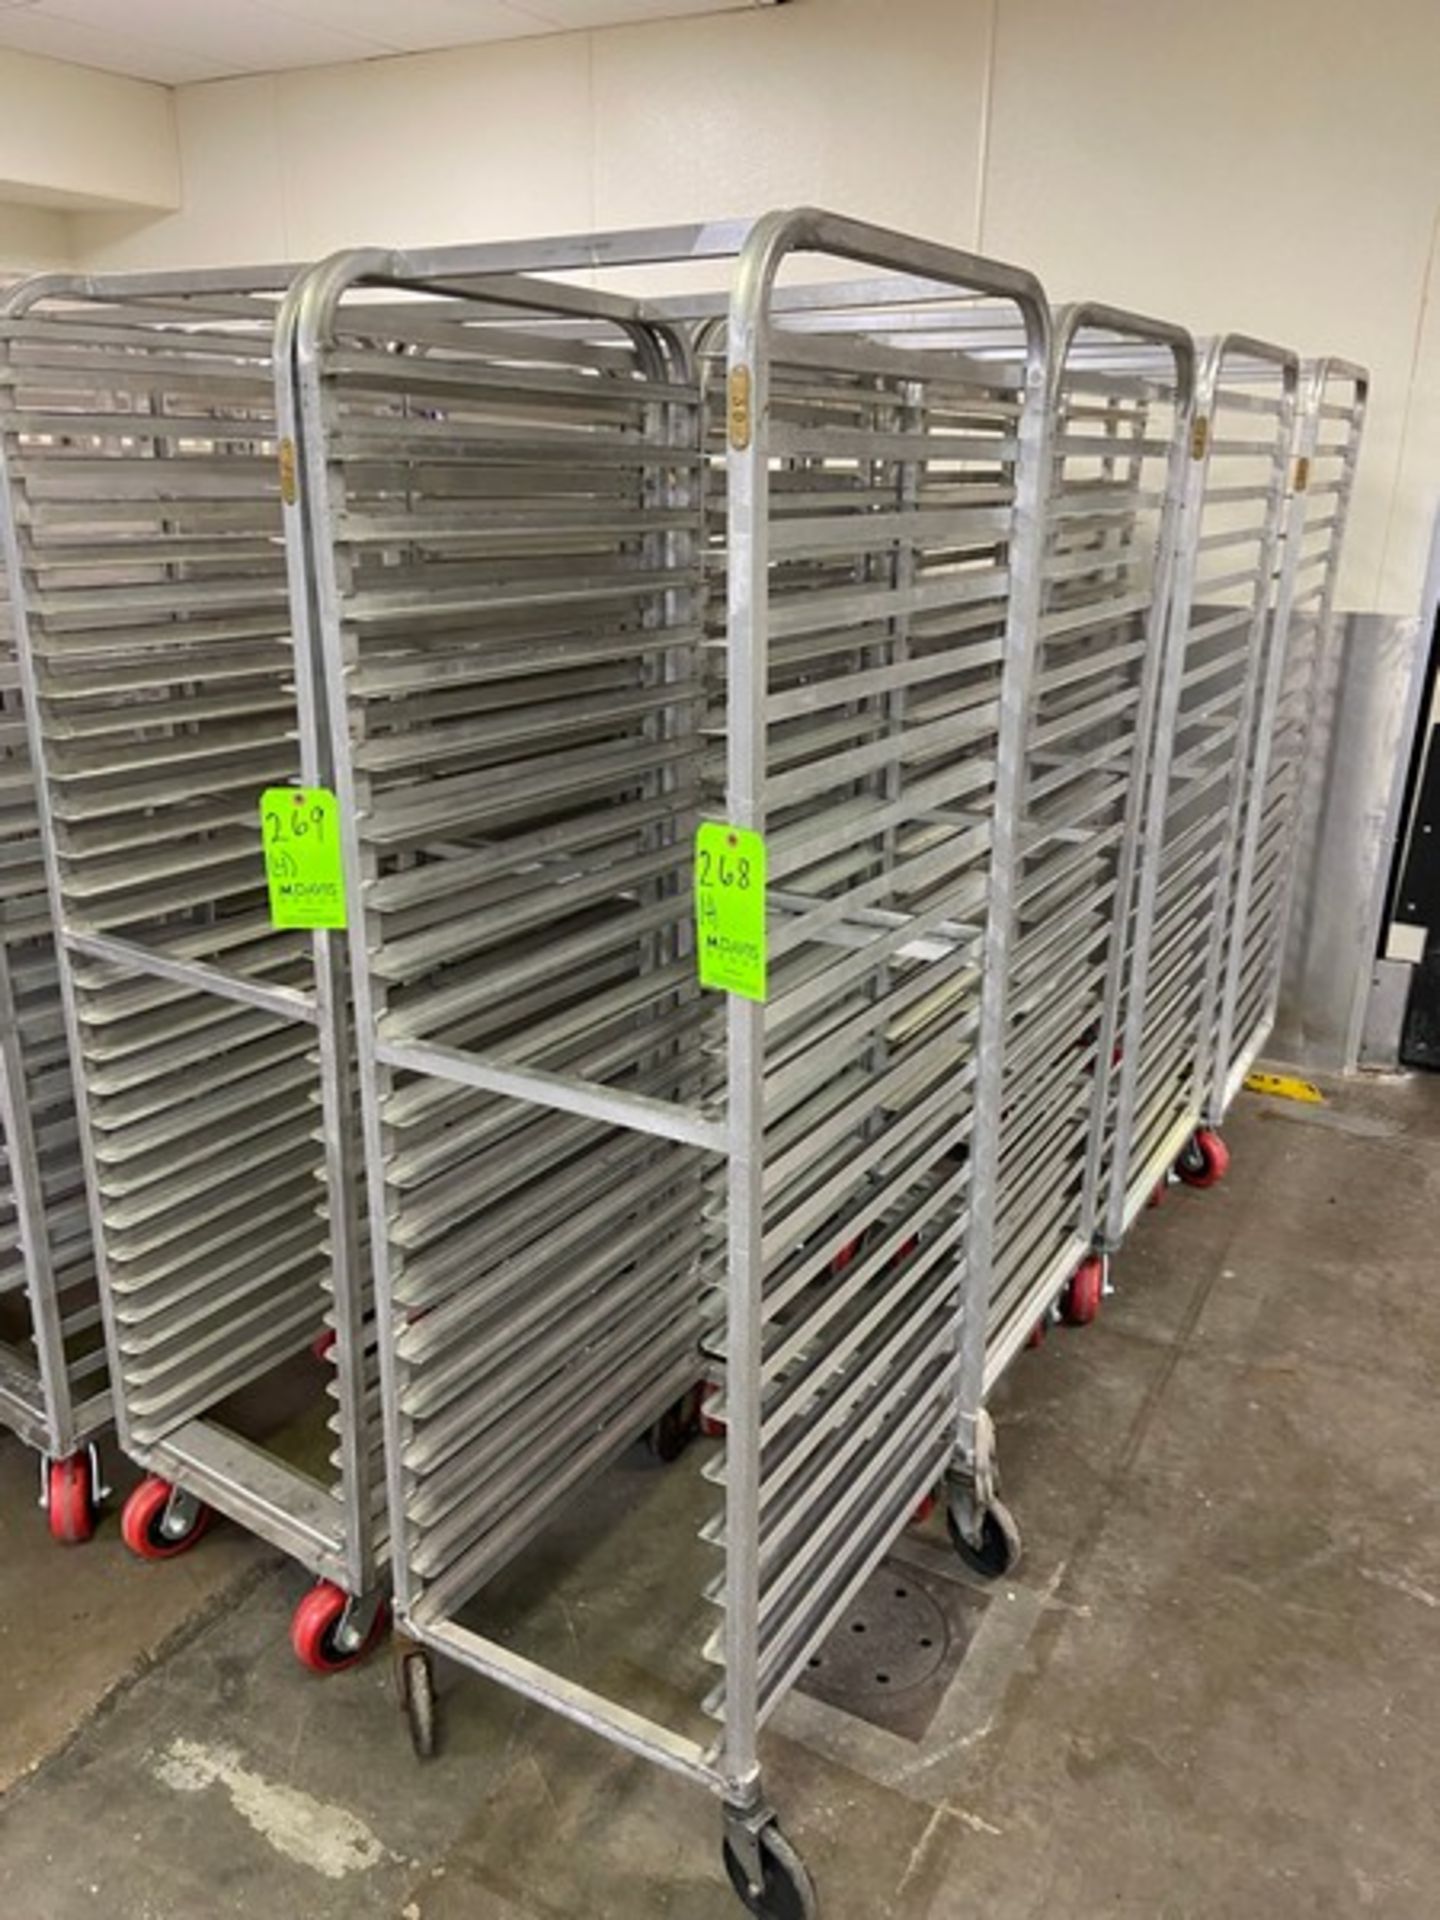 (4) BAKING RACKS, HOLDS 20 PANS, OVERALL DIMS.: APROX. 28" L x 21" W x 70" H (LOCATED IN CALLERY, - Image 3 of 3